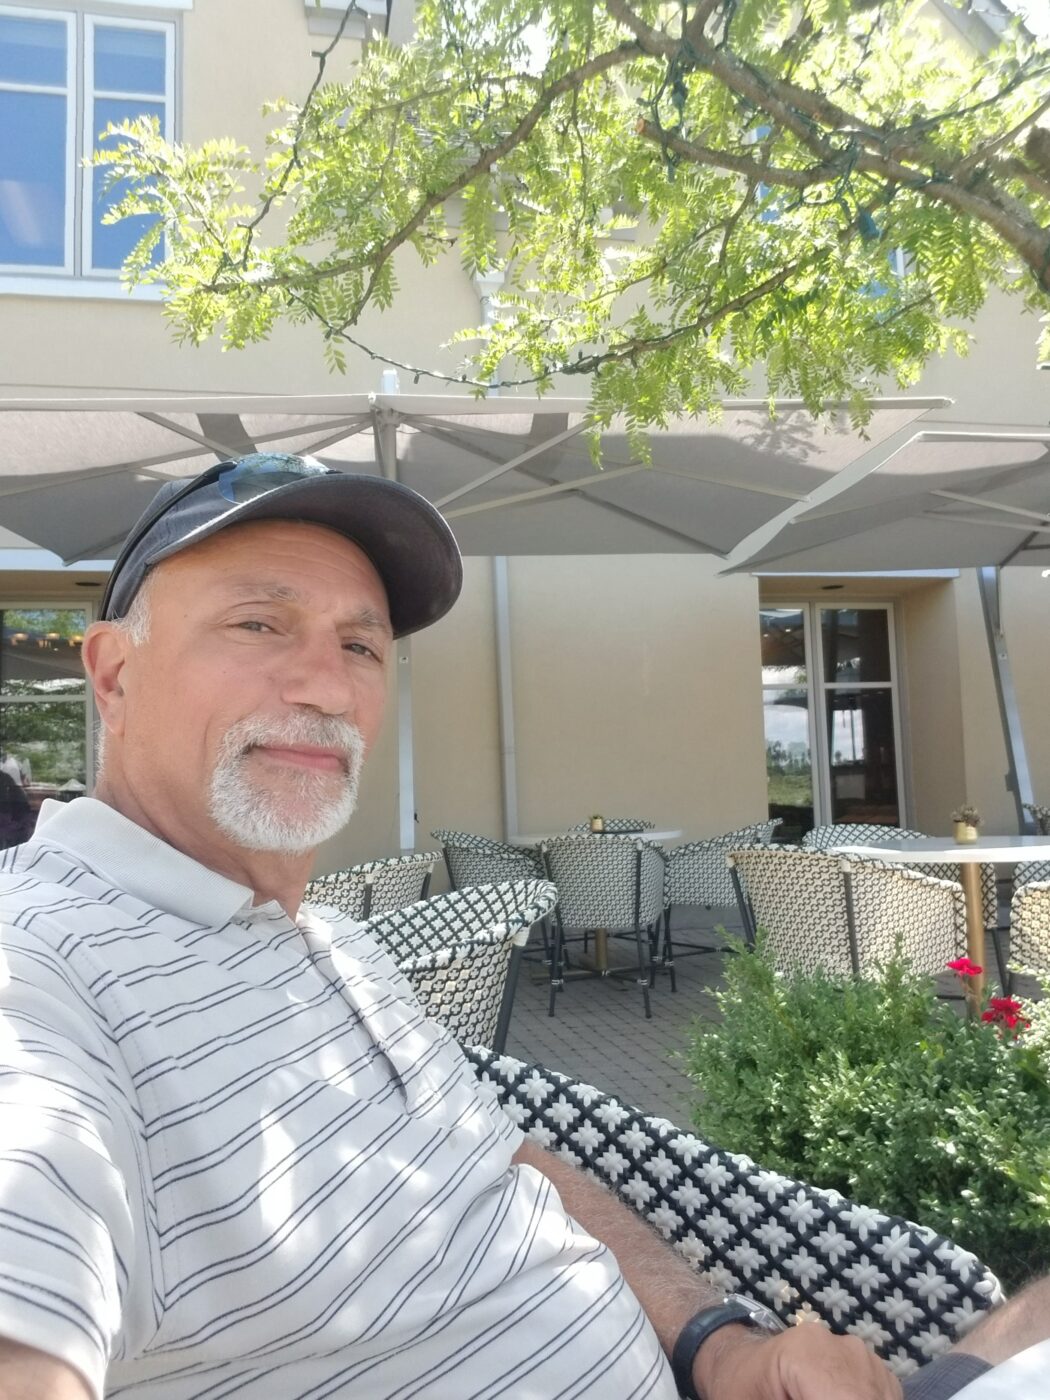 A man sitting outside under a tree near a grey umbrella. He is wearing a grey striped polo shirt and a dary grey ball cap. He has a grey facial hair.